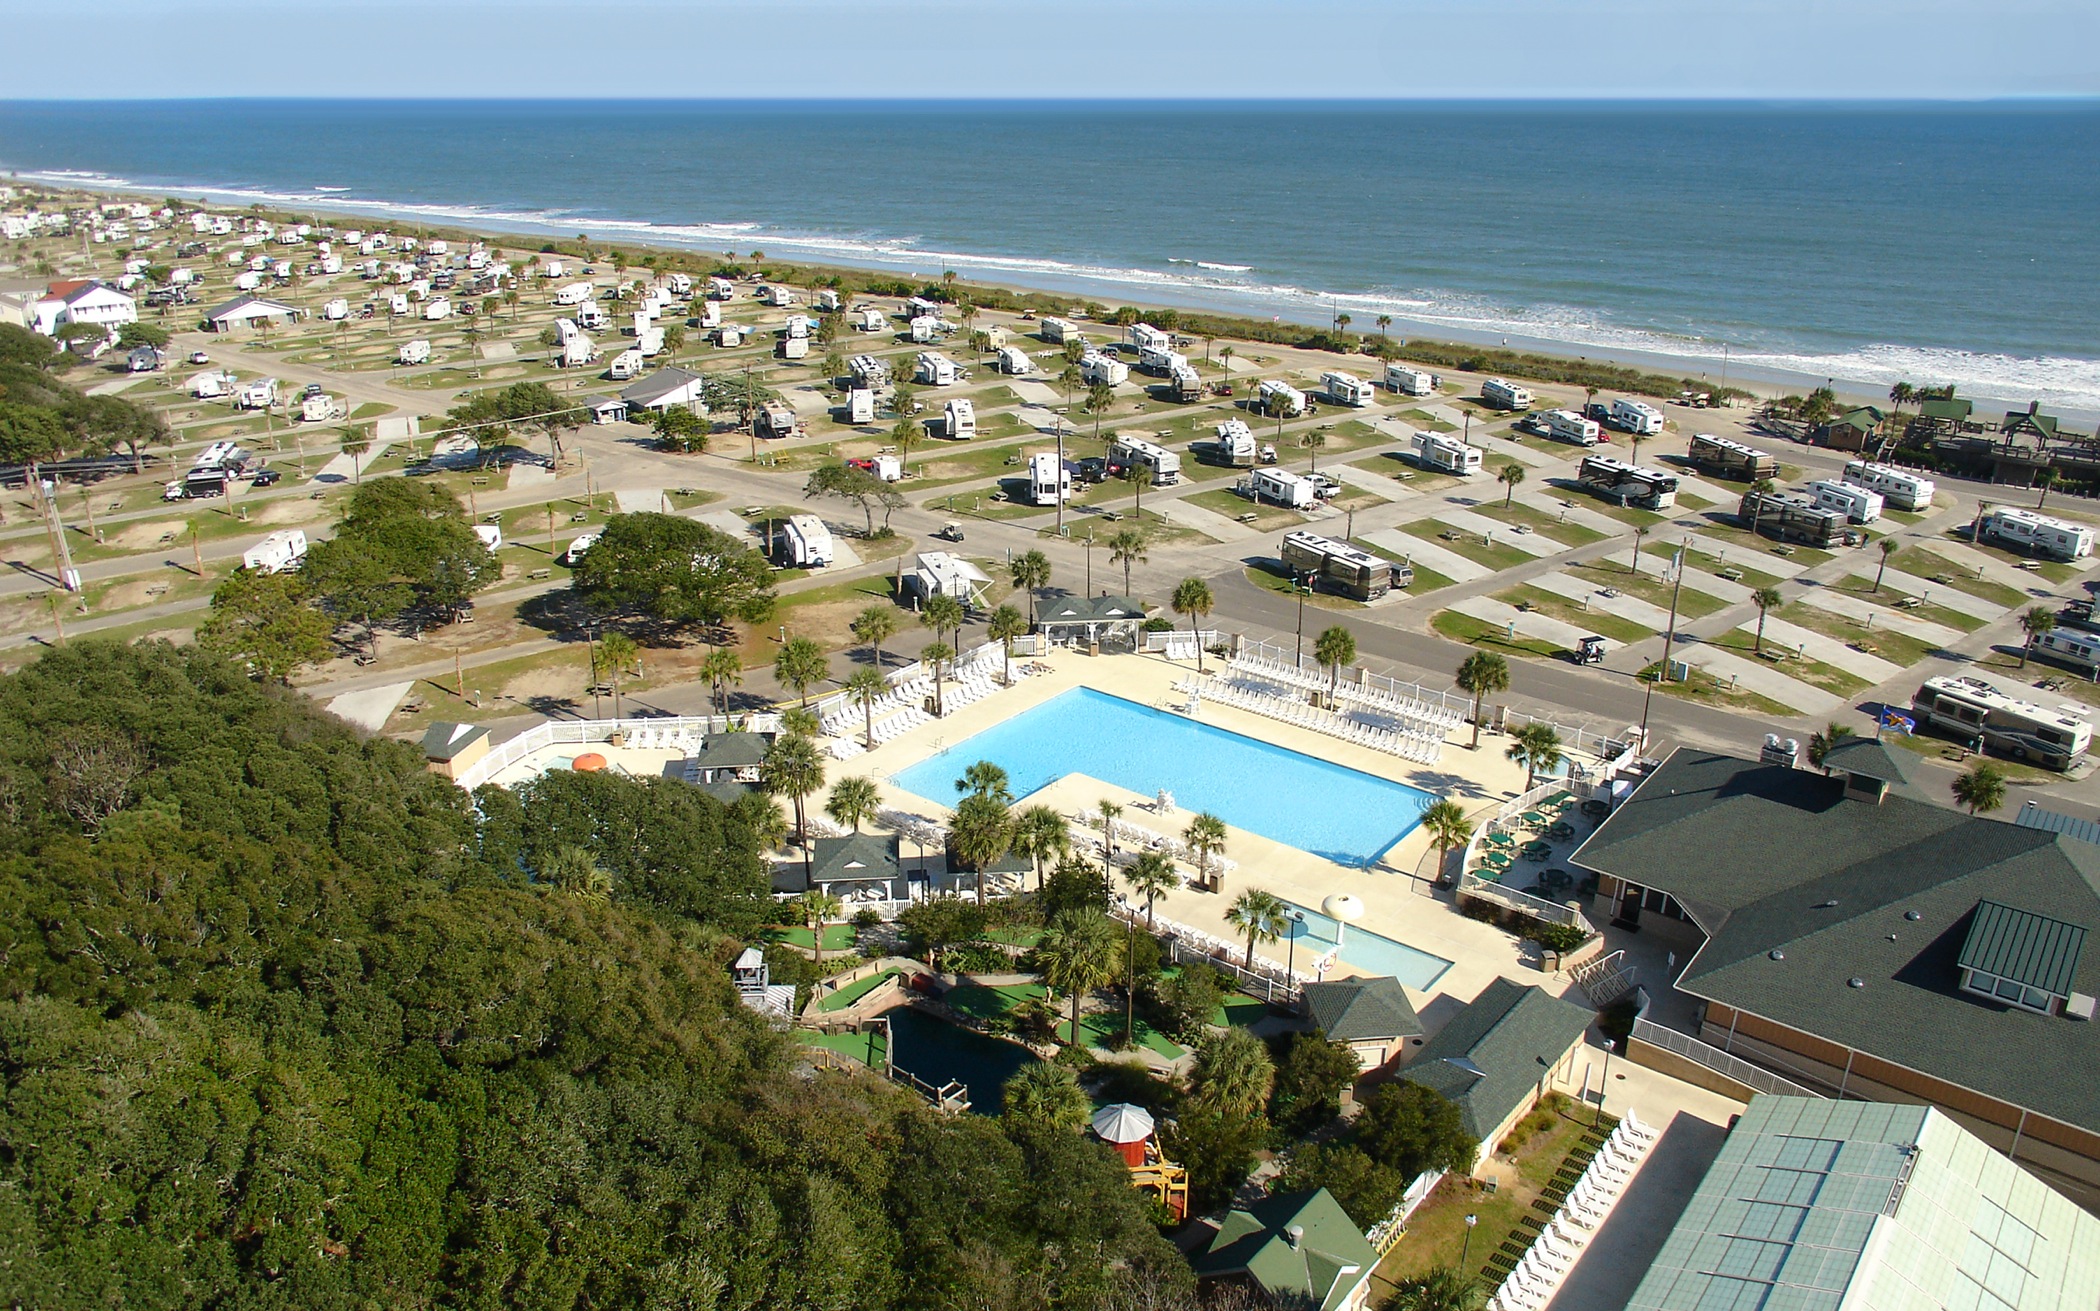 ocean lakes campground map Ocean Lakes Family Campground Offers Family Friendly Fall And ocean lakes campground map